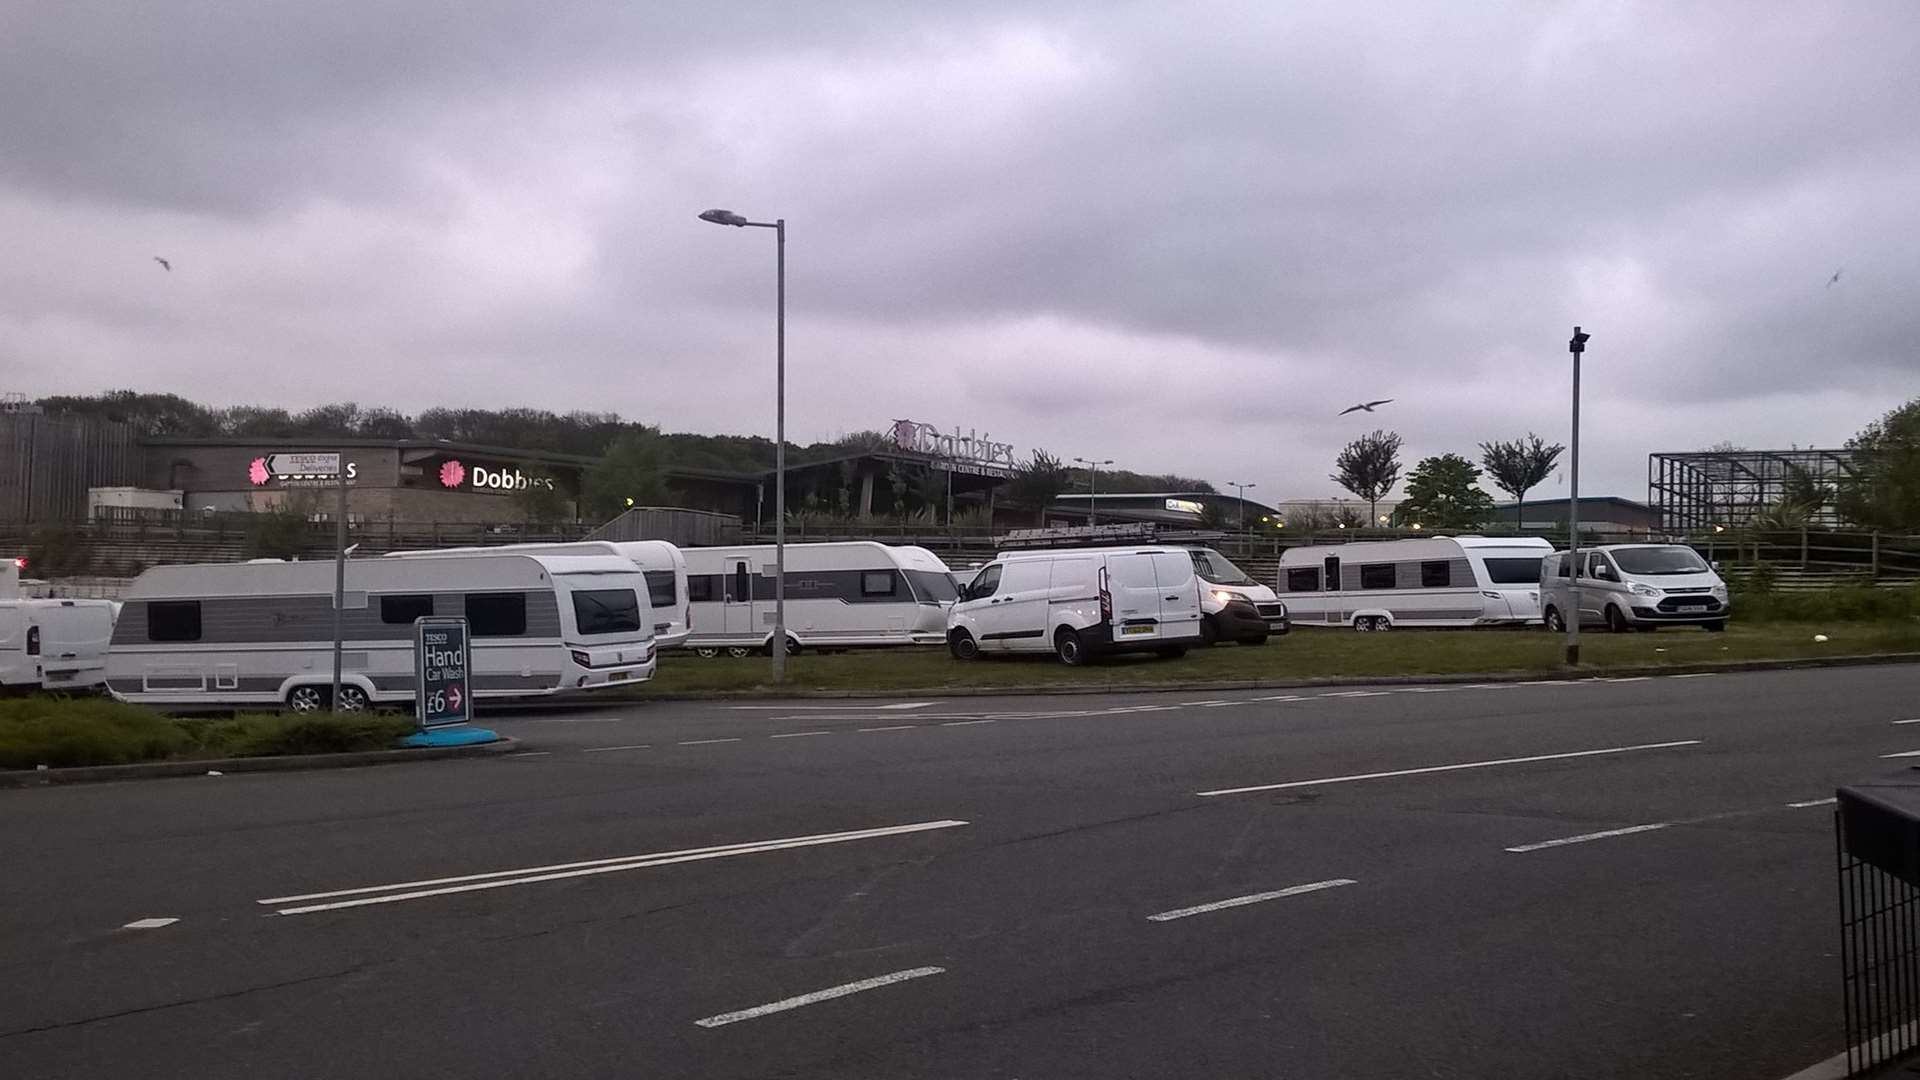 The travellers at Tesco